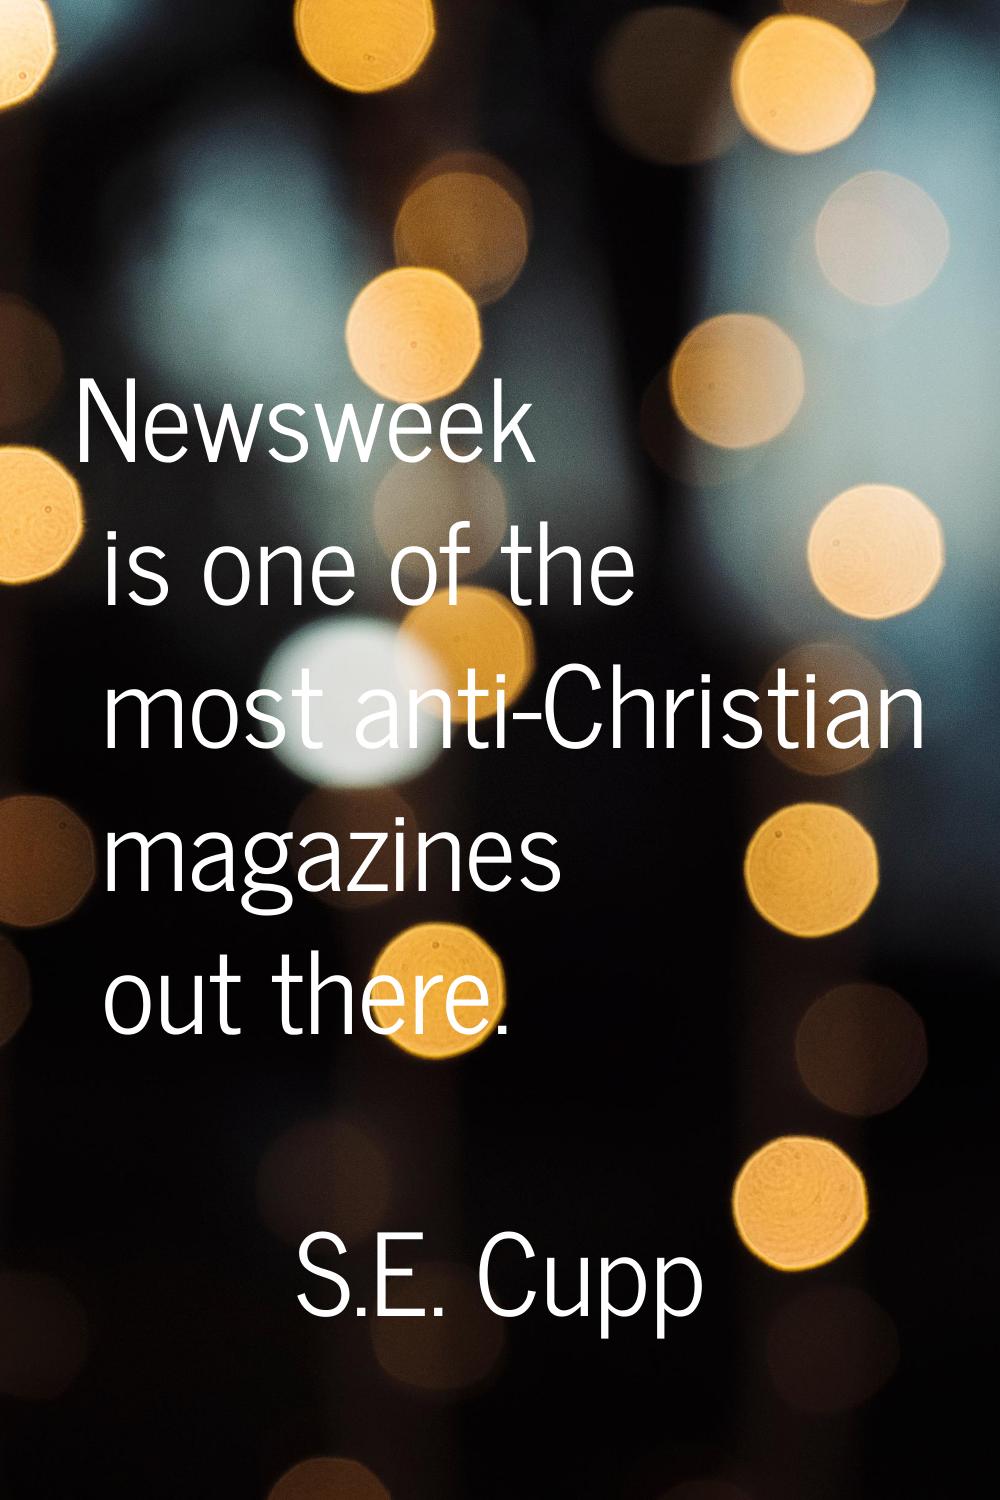 Newsweek is one of the most anti-Christian magazines out there.